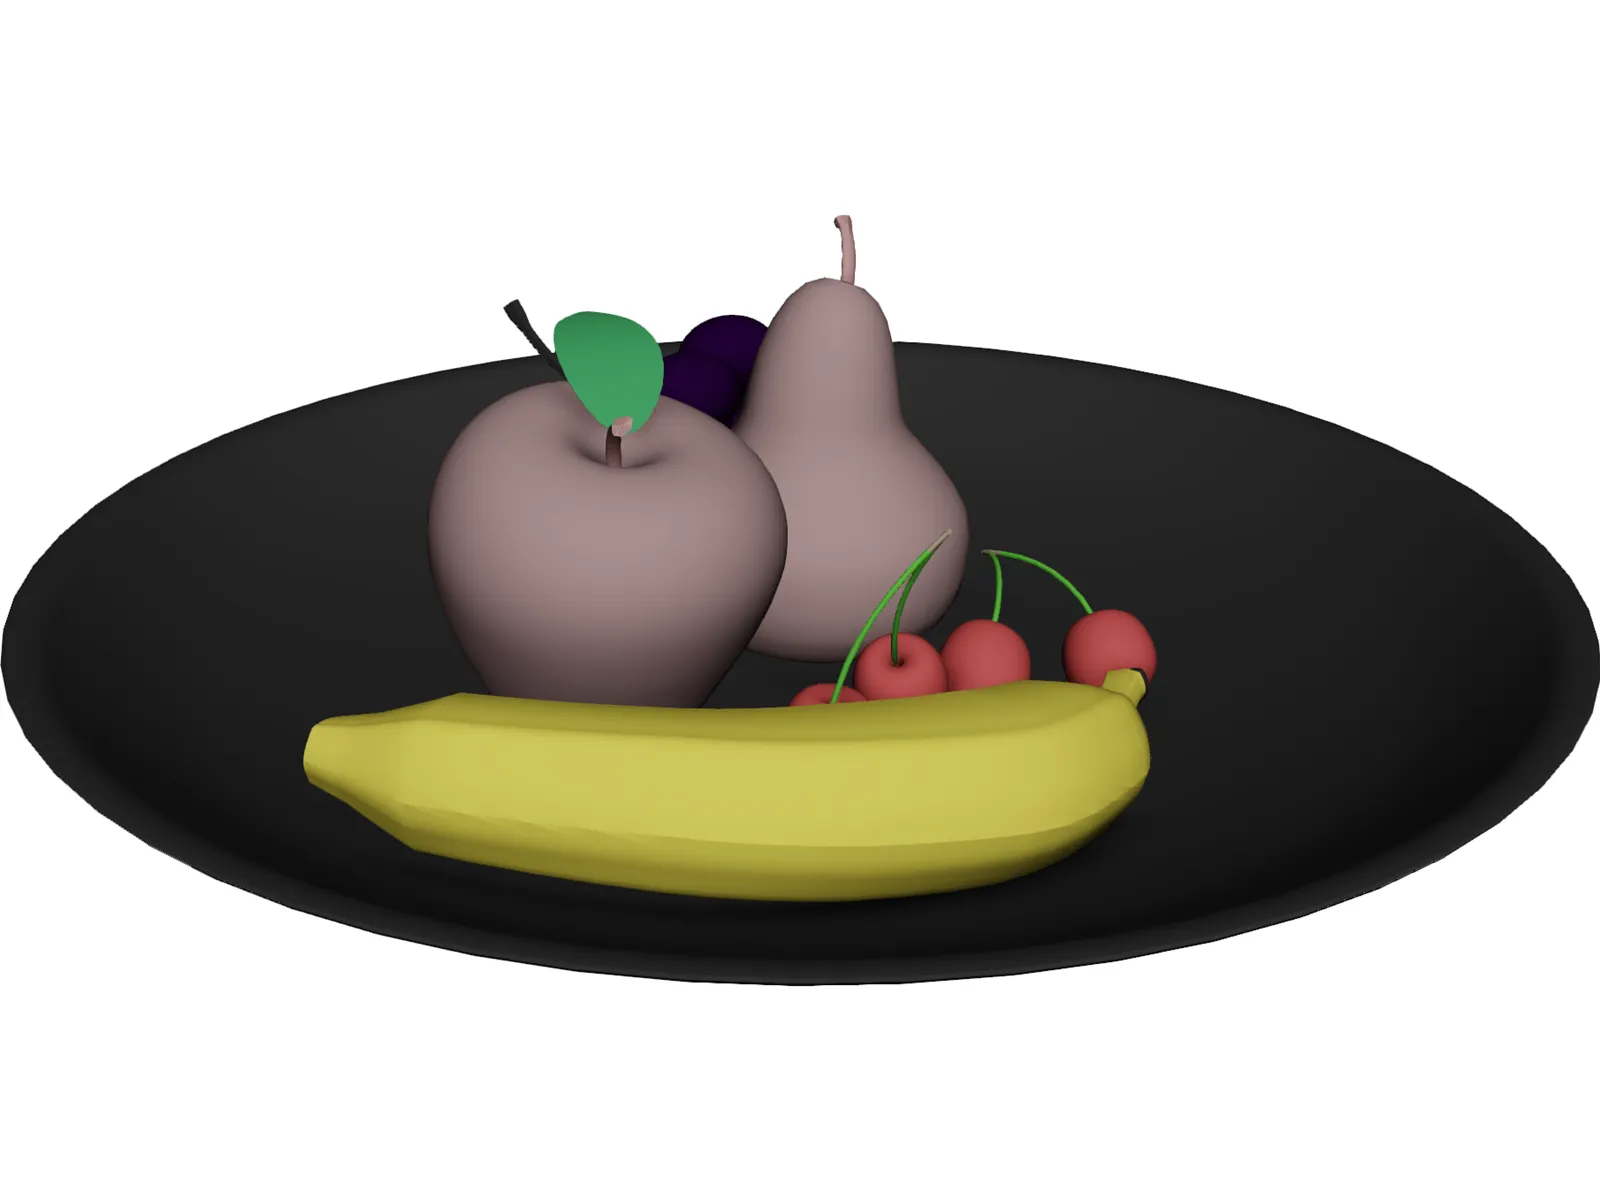 Fruits On Plate 3D Model